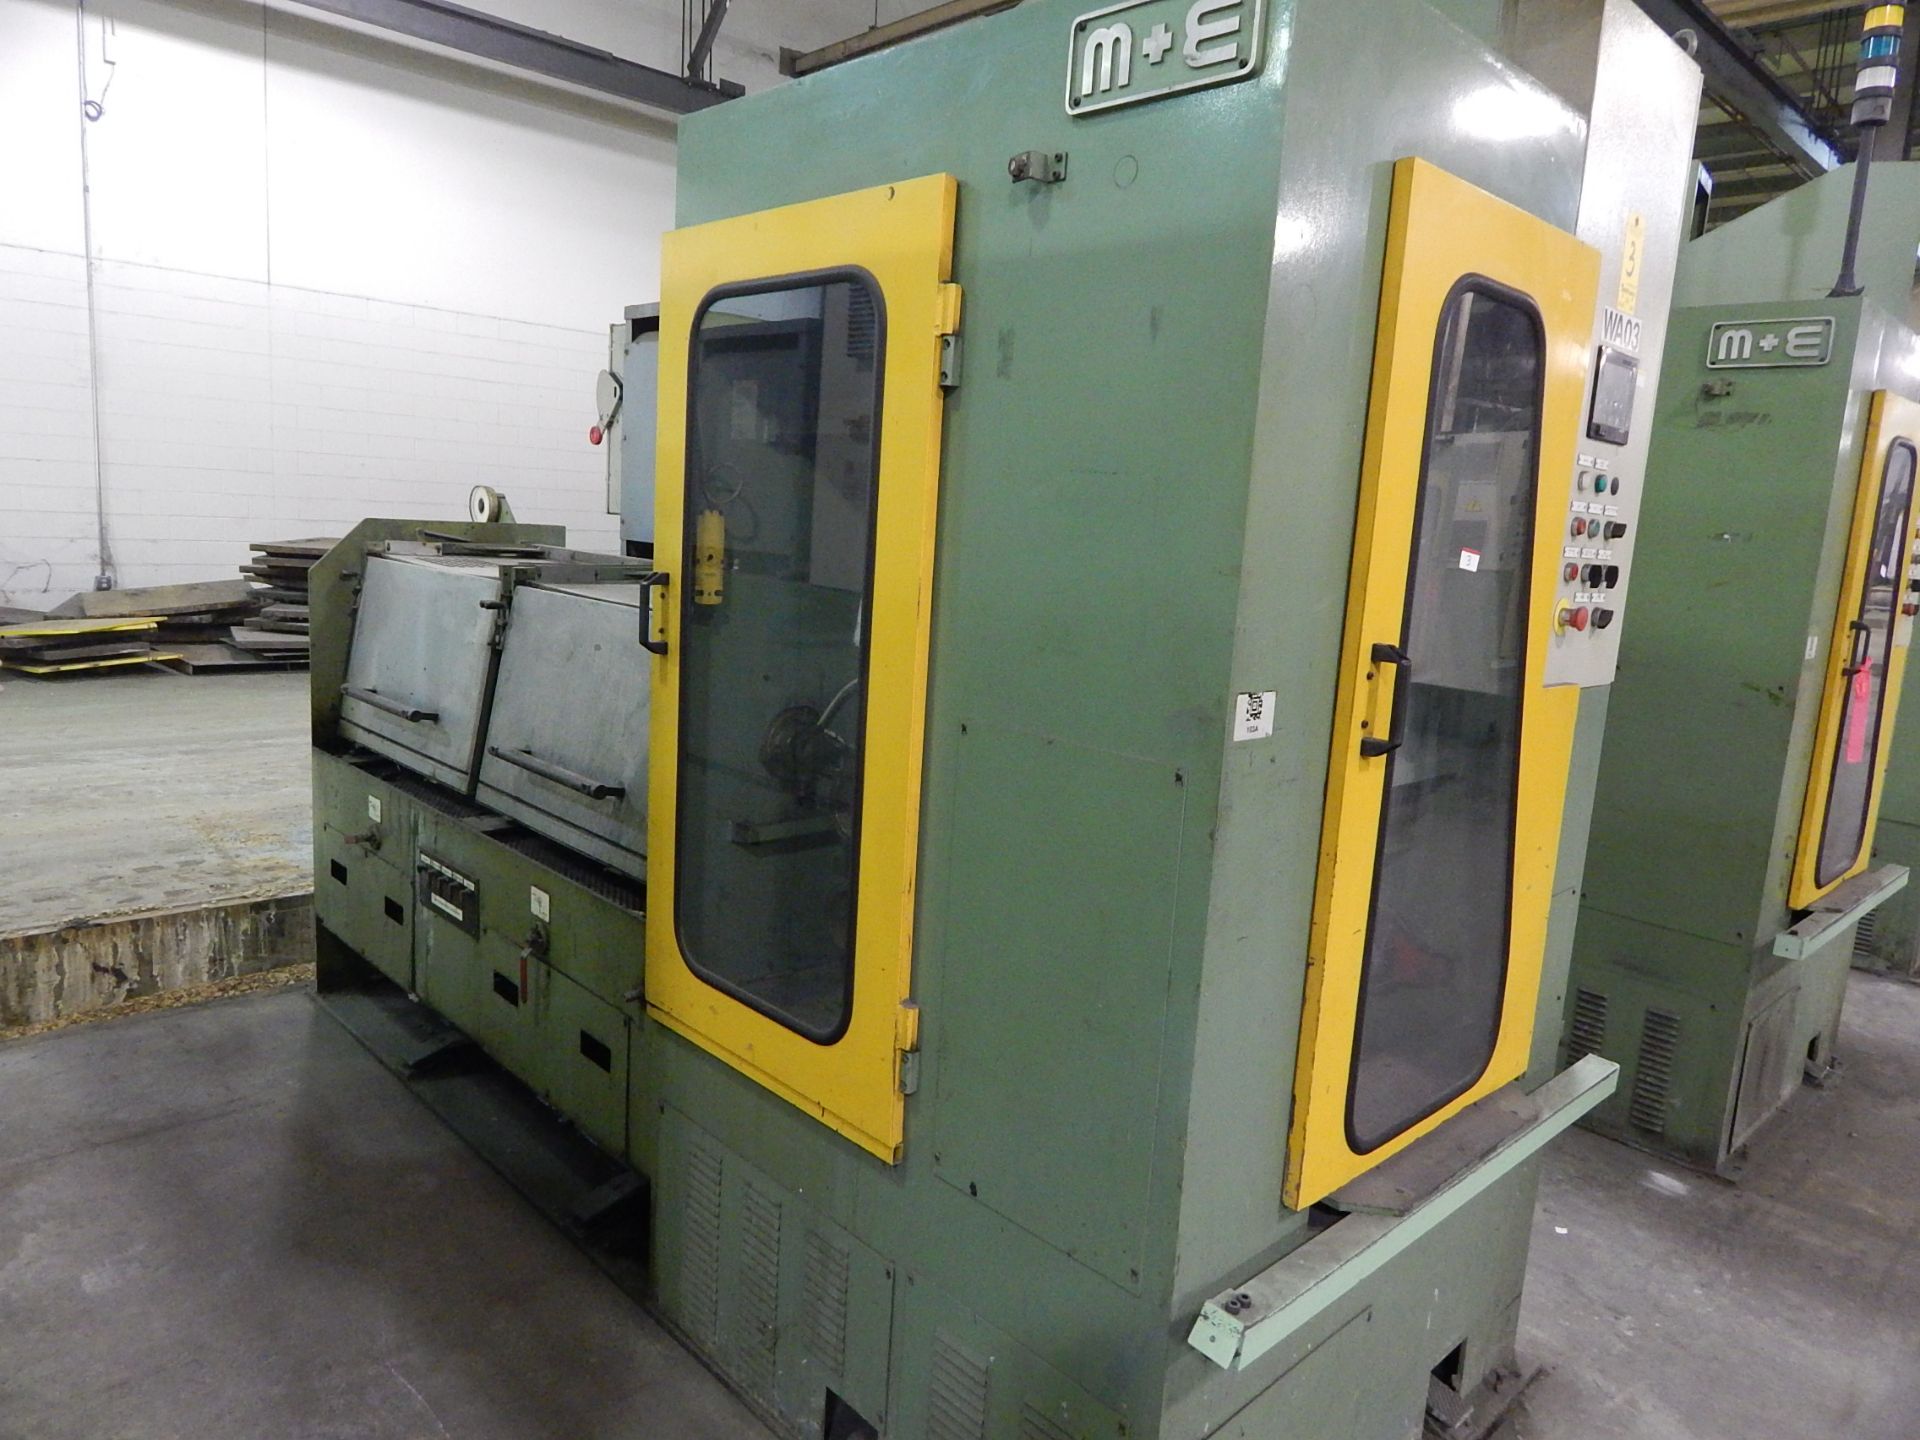 M & E Model NMG 25 Wet Wire Drawing Machine, SN 4252-13-09 with Integrated Spooler Model, SP 330, - Image 3 of 6